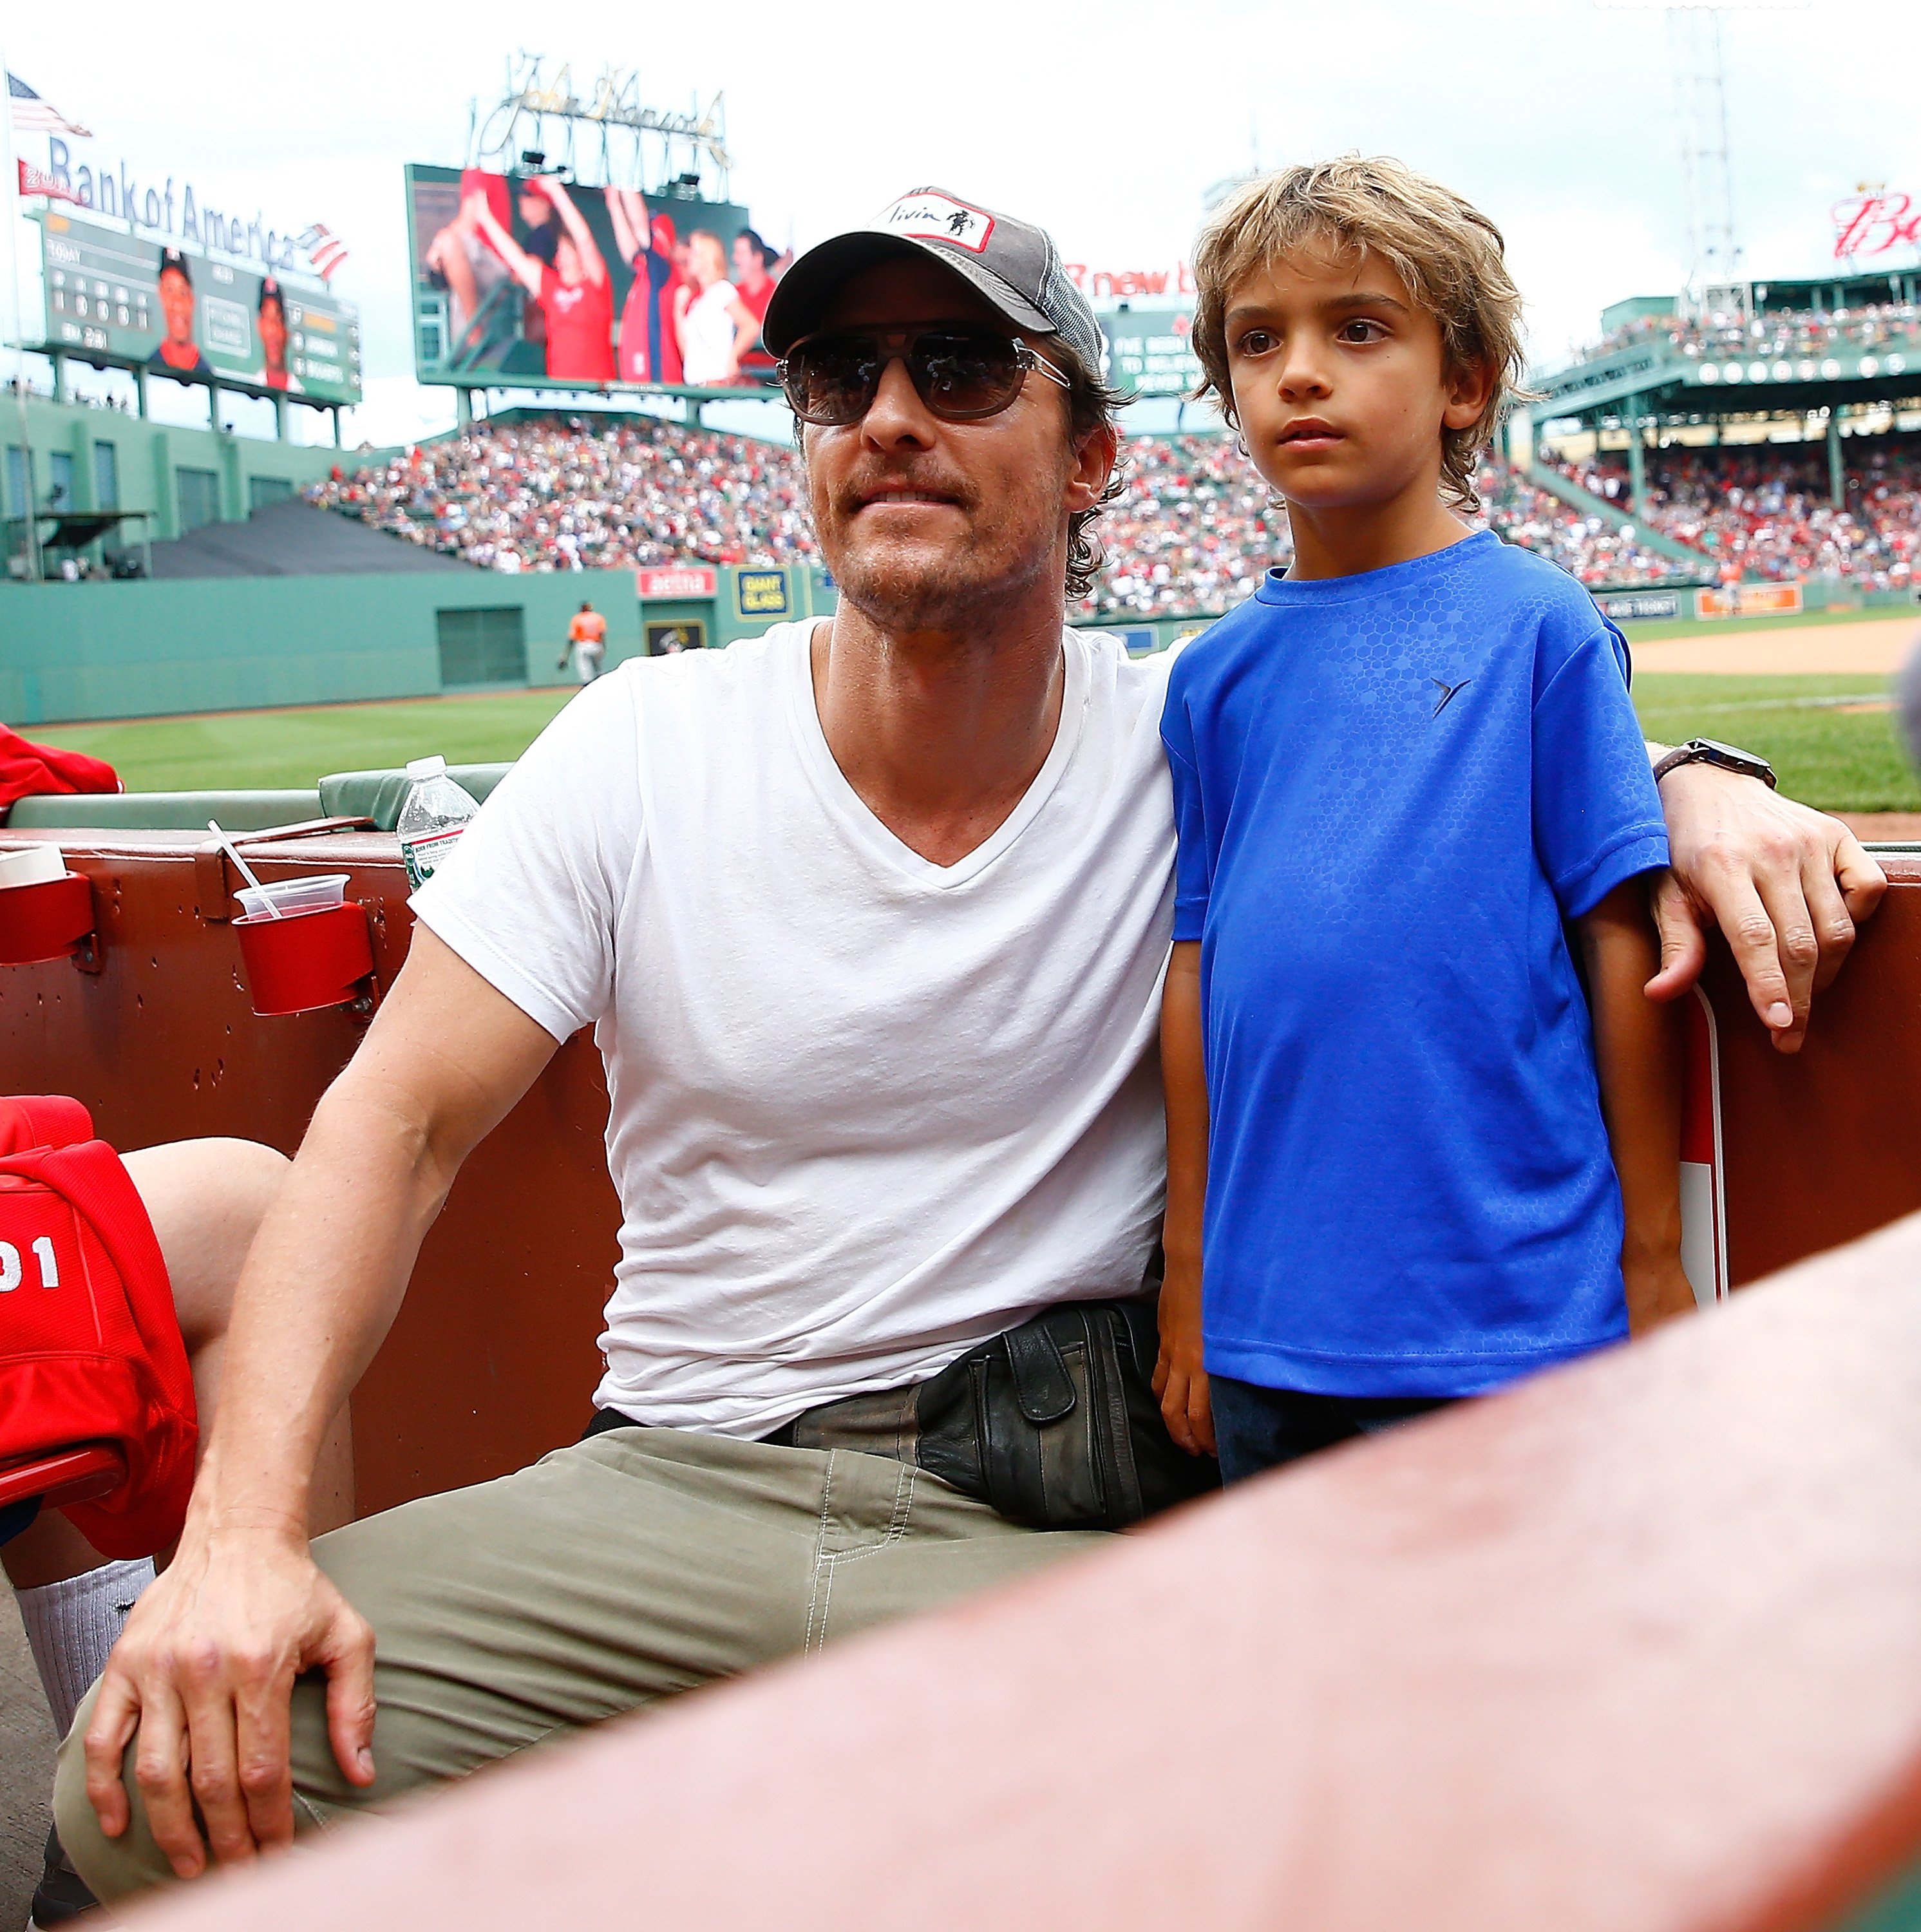 Actor Matthew McConaughey and his son Levi pose for a photo during the game between the Boston Red Sox and the Houston Astros during the game at Fenway Park on August 17, 2014  | Source: Getty Images